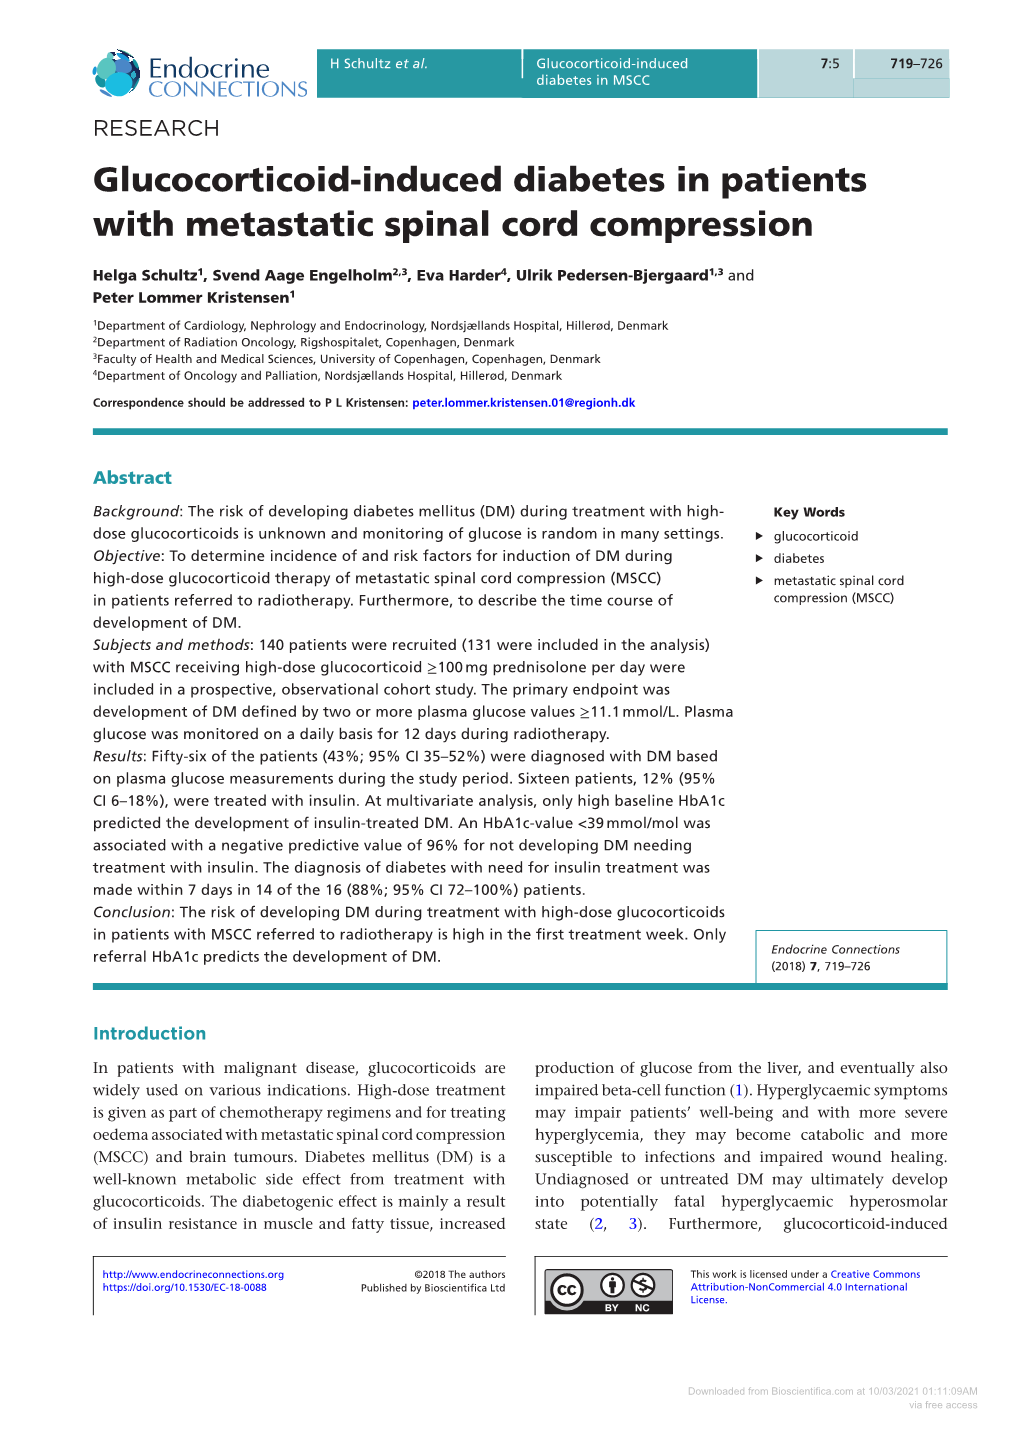 Glucocorticoid-Induced Diabetes in Patients with Metastatic Spinal Cord Compression